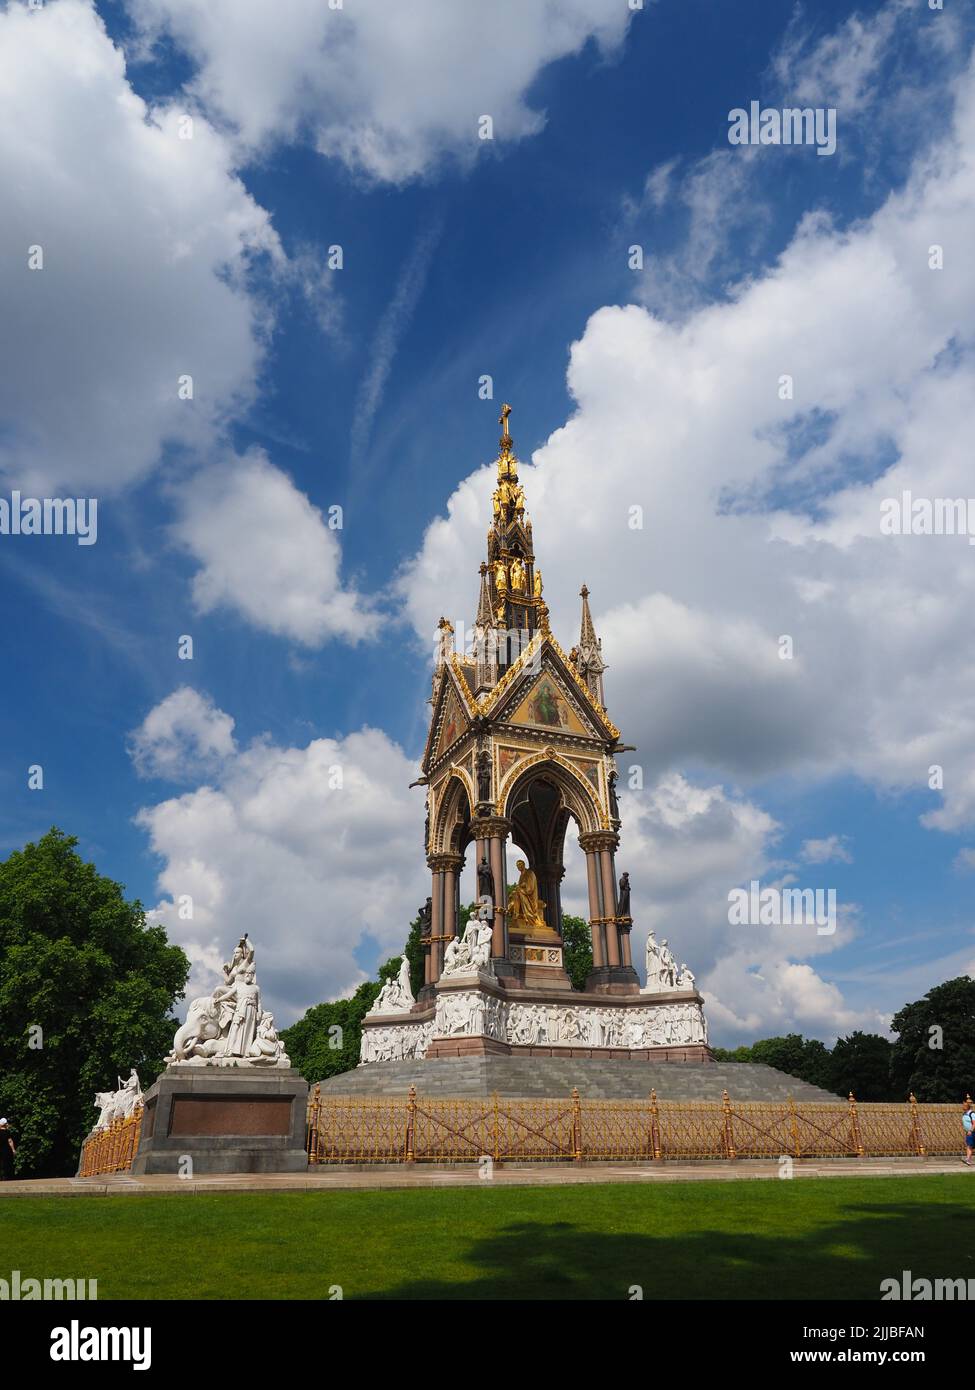 The Royal Albert Memorial in Kensington in London on a bright summer's day Stock Photo